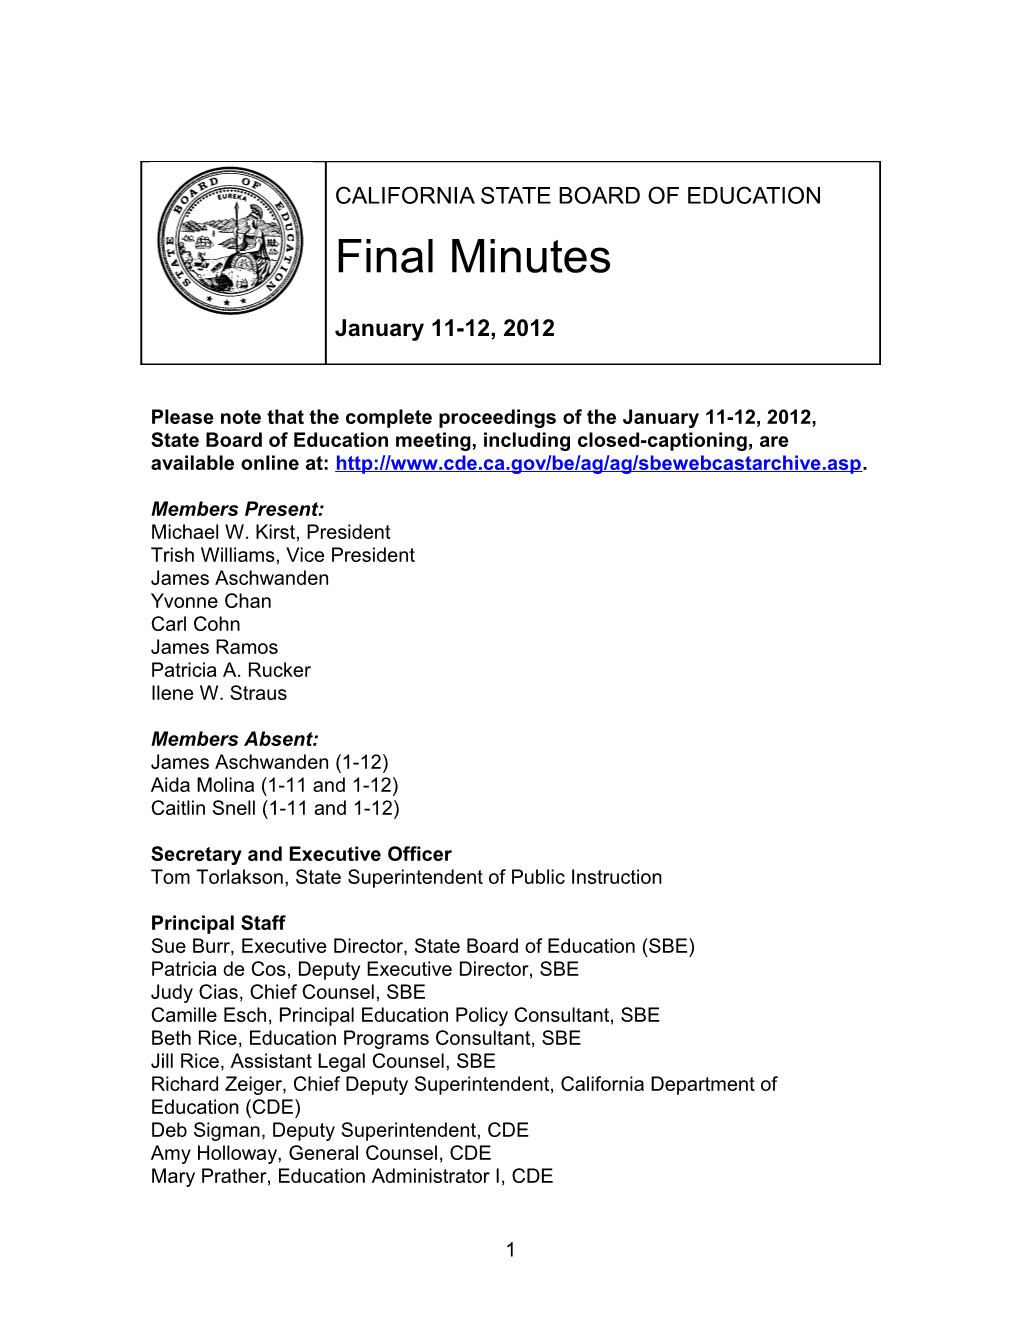 Final Minutes for January 11-12, 2012 - SBE Minutes (CA State Board of Education)